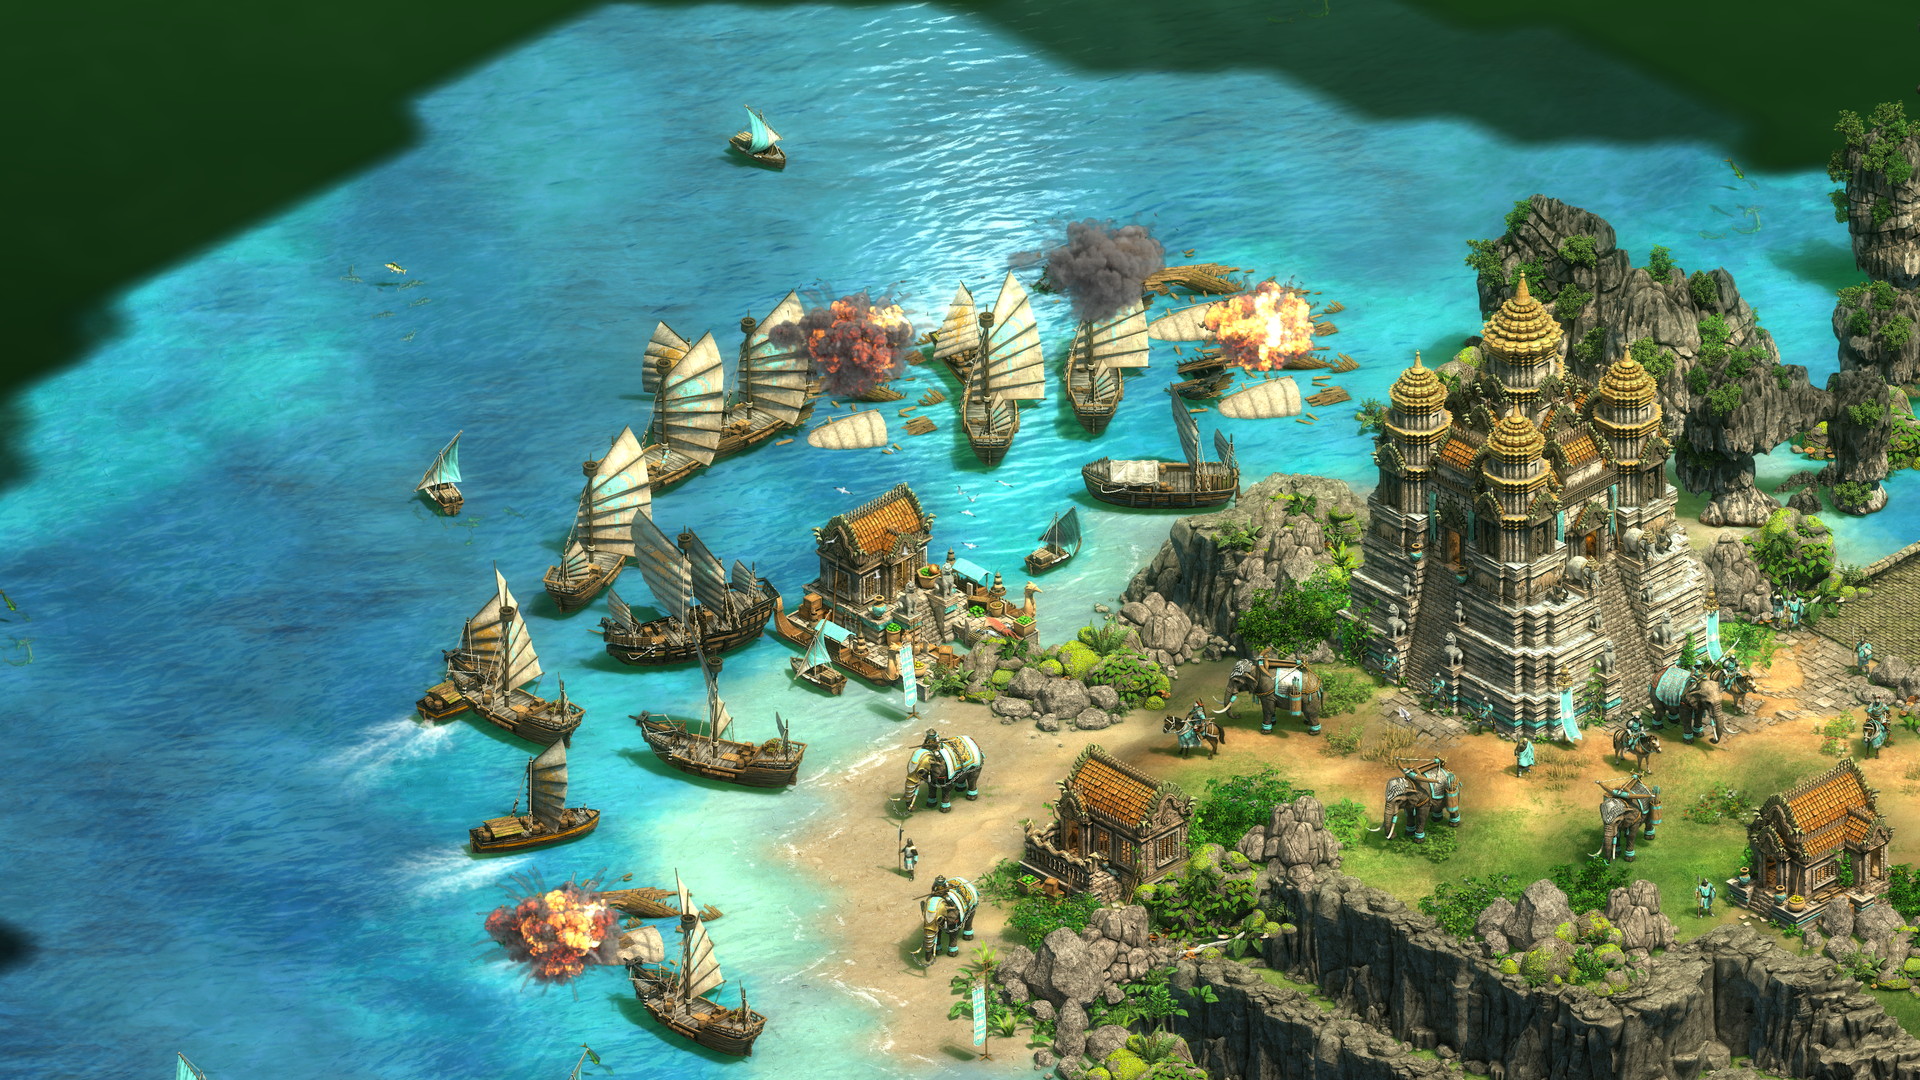 Age of Empires II: Definitive Edition - screenshot 7